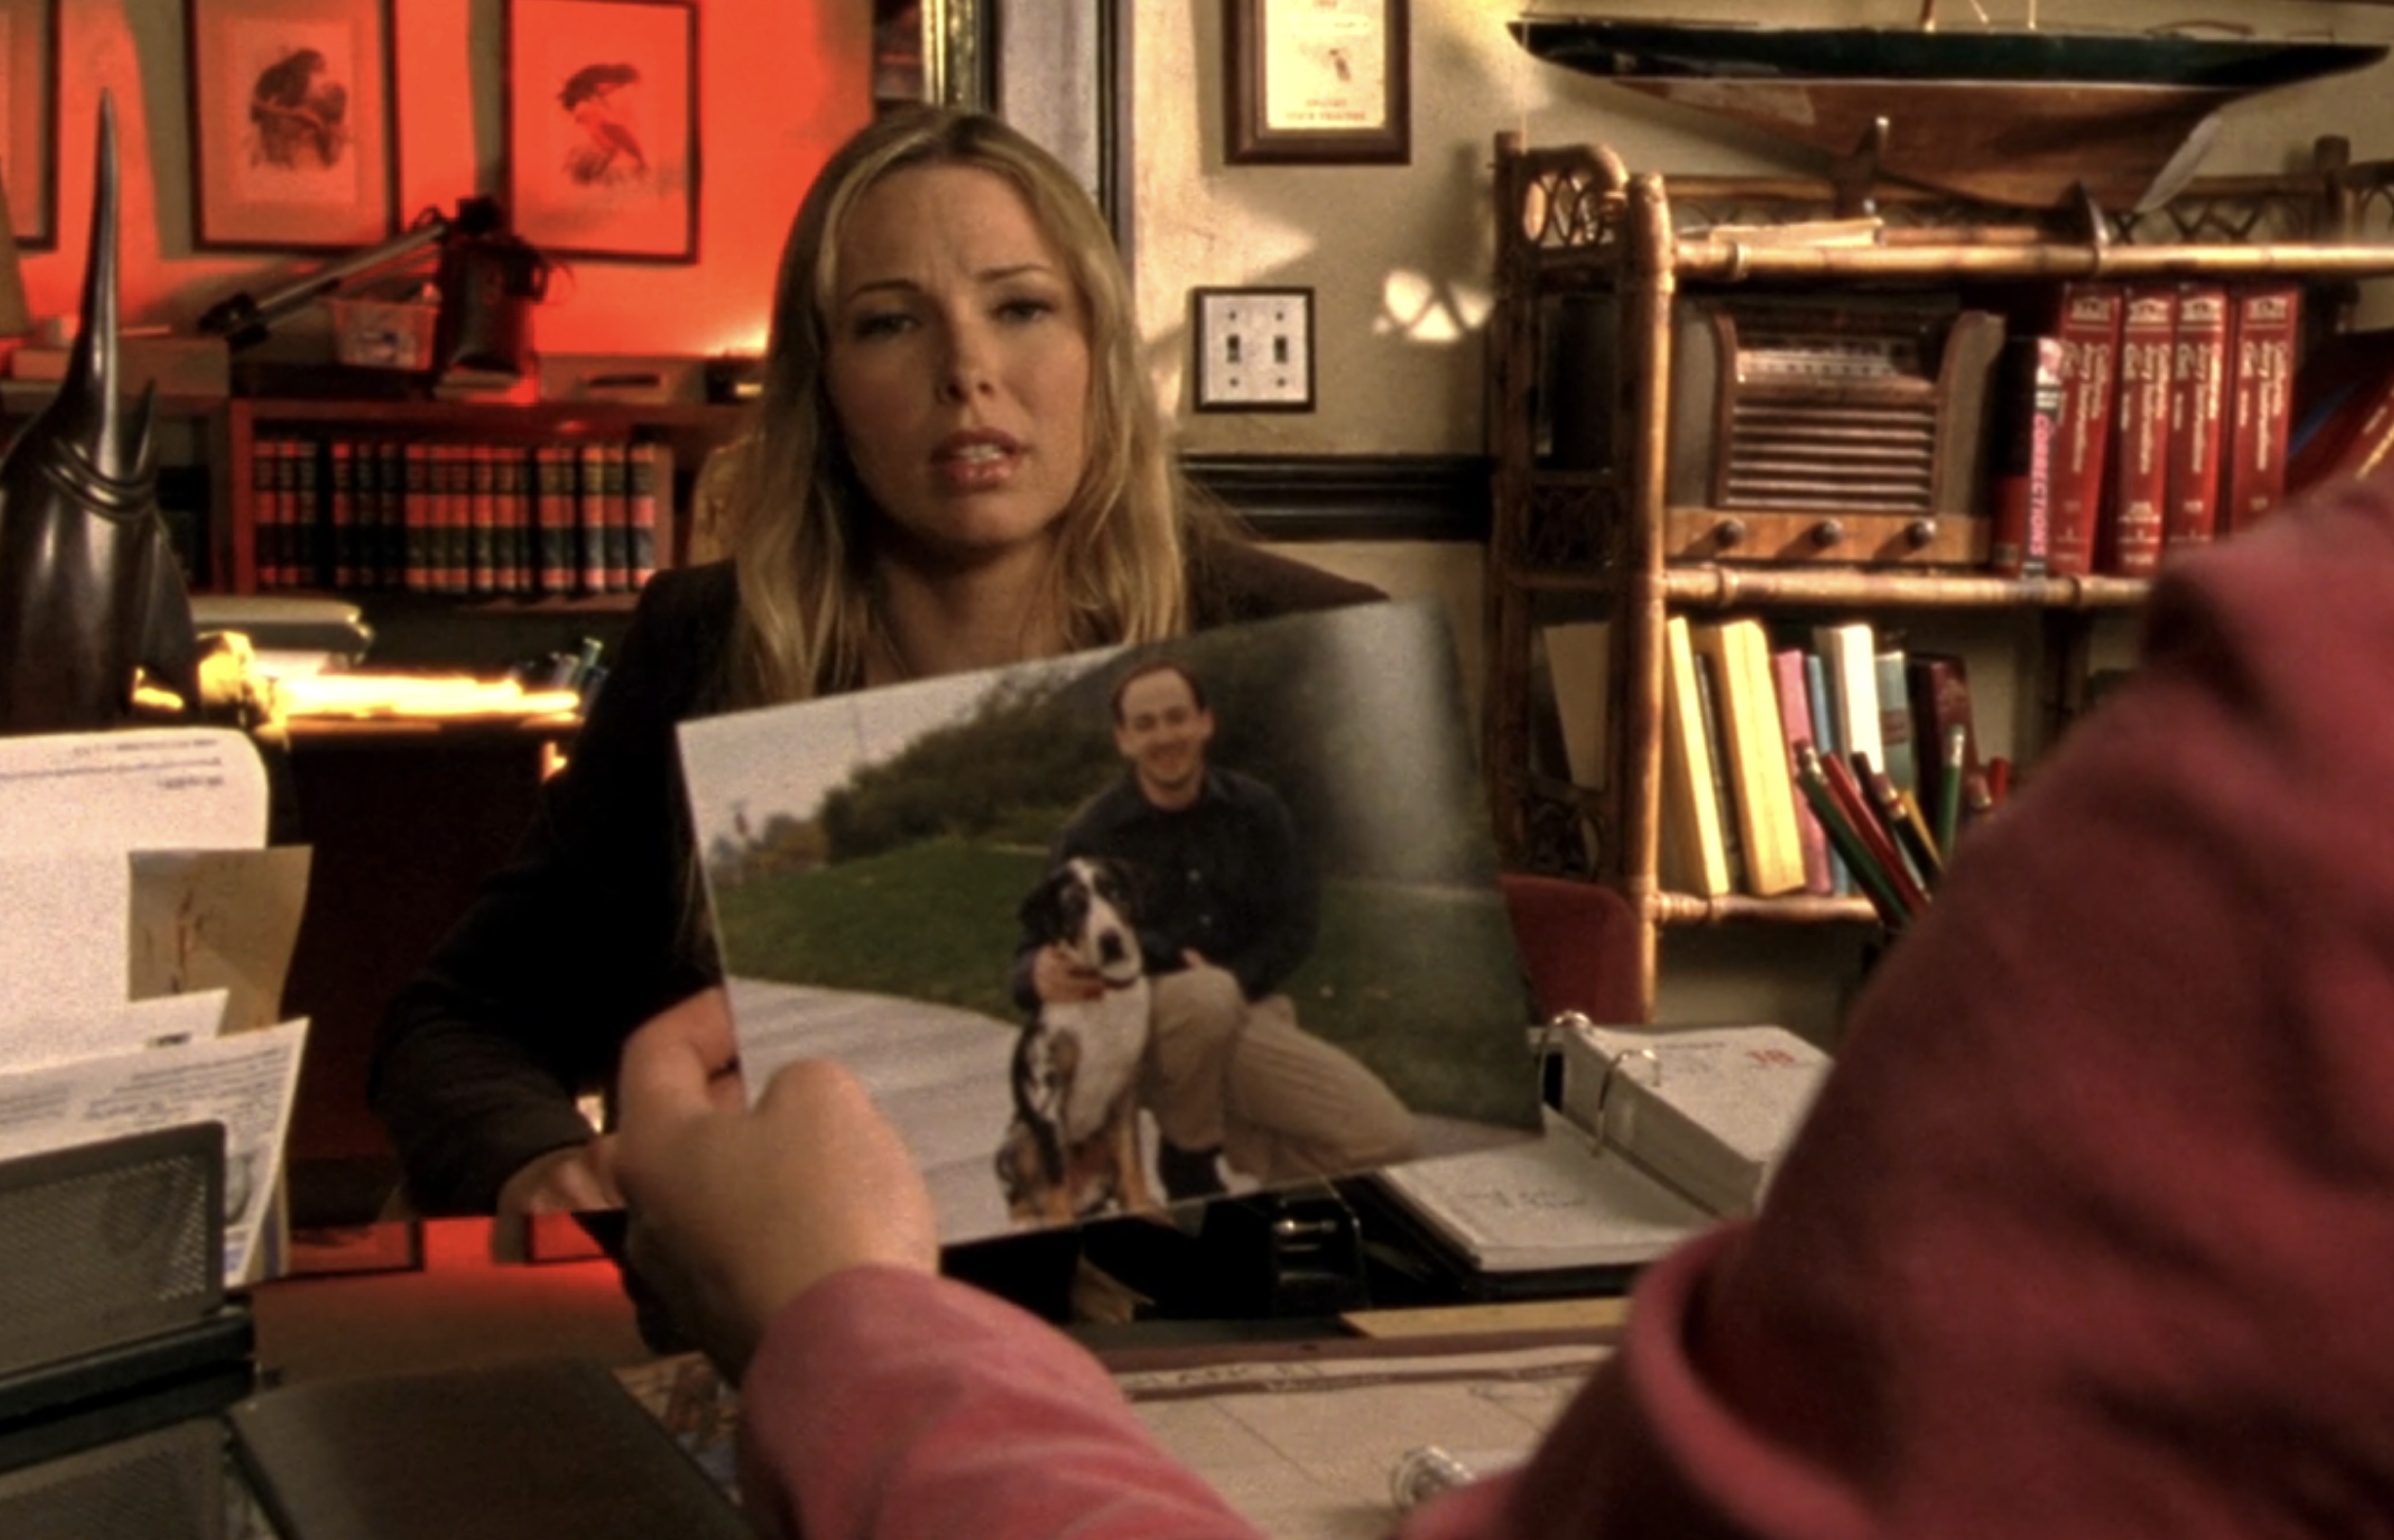 Screenshot from Veronica Mars S1E15. A blond woman is sitting at a desk looking at Veronica who we see from behind holding a photograph of a balding man with a dog.